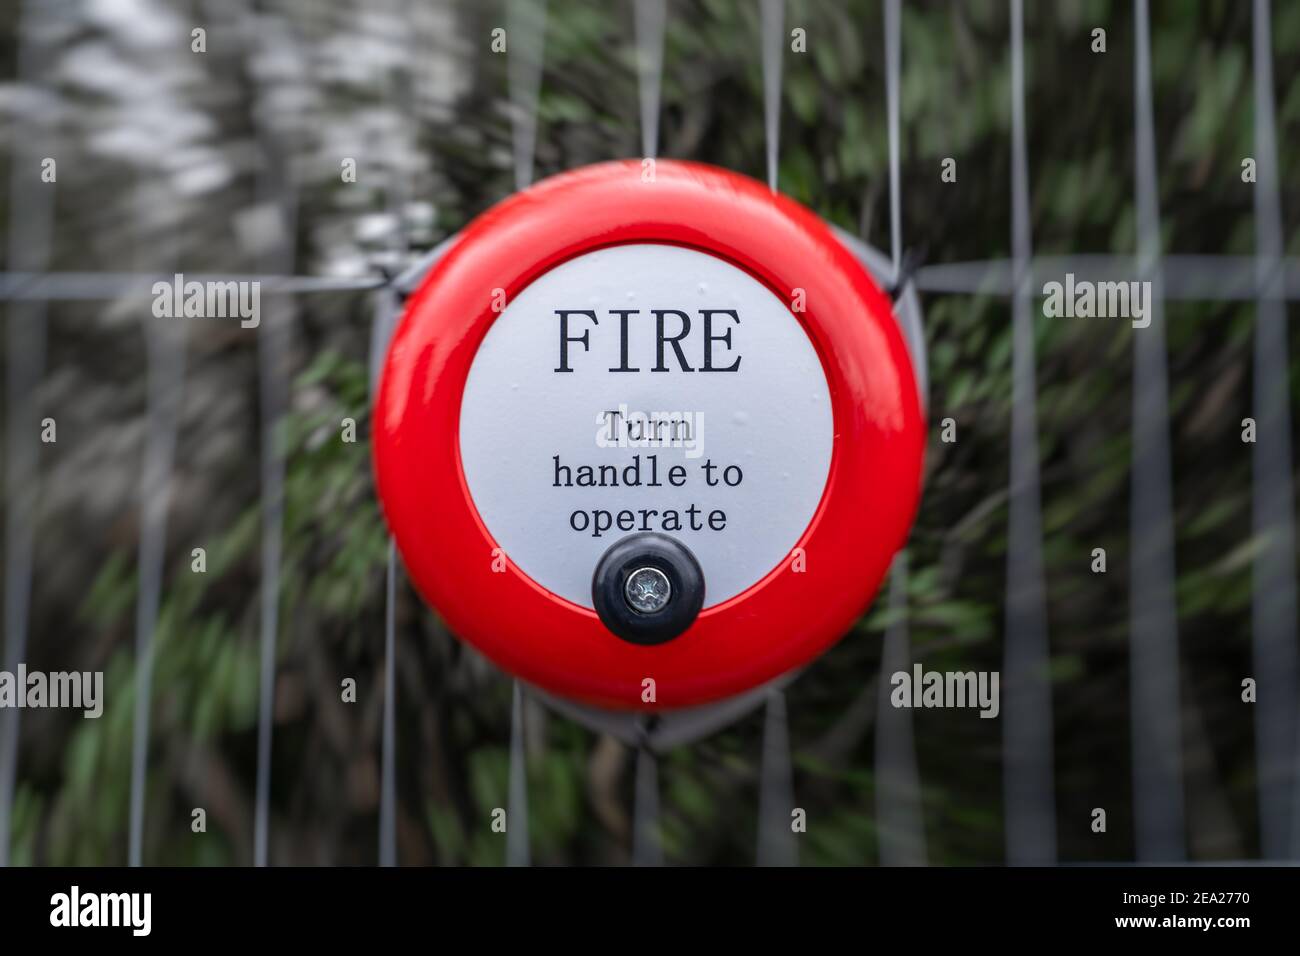 Bright red metal fire alarm bell turn handle to operate alert manual steel  ringing on construction building site attached to metal fence Stock Photo -  Alamy